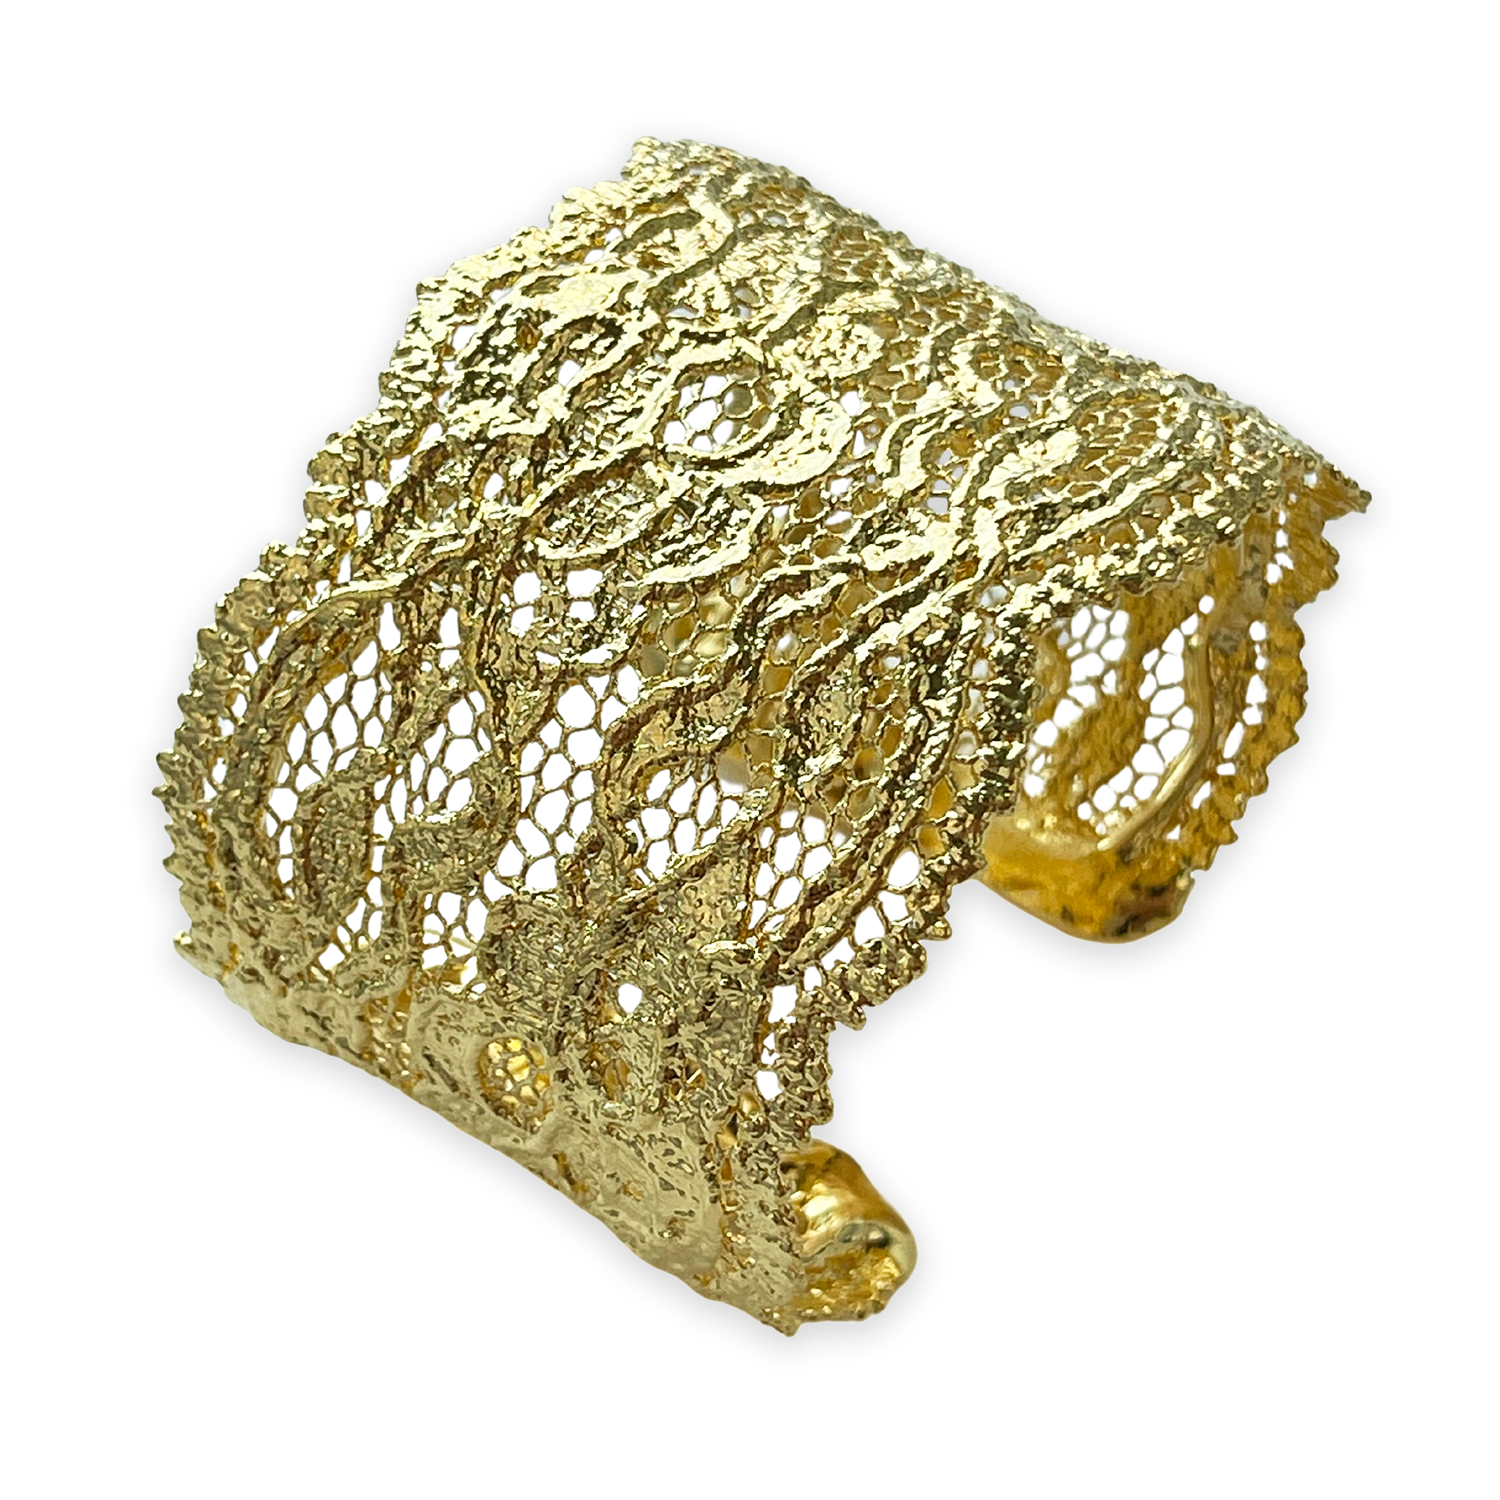 Cuff bracelet made from antique double scalloped lace dipped in 24k gold.